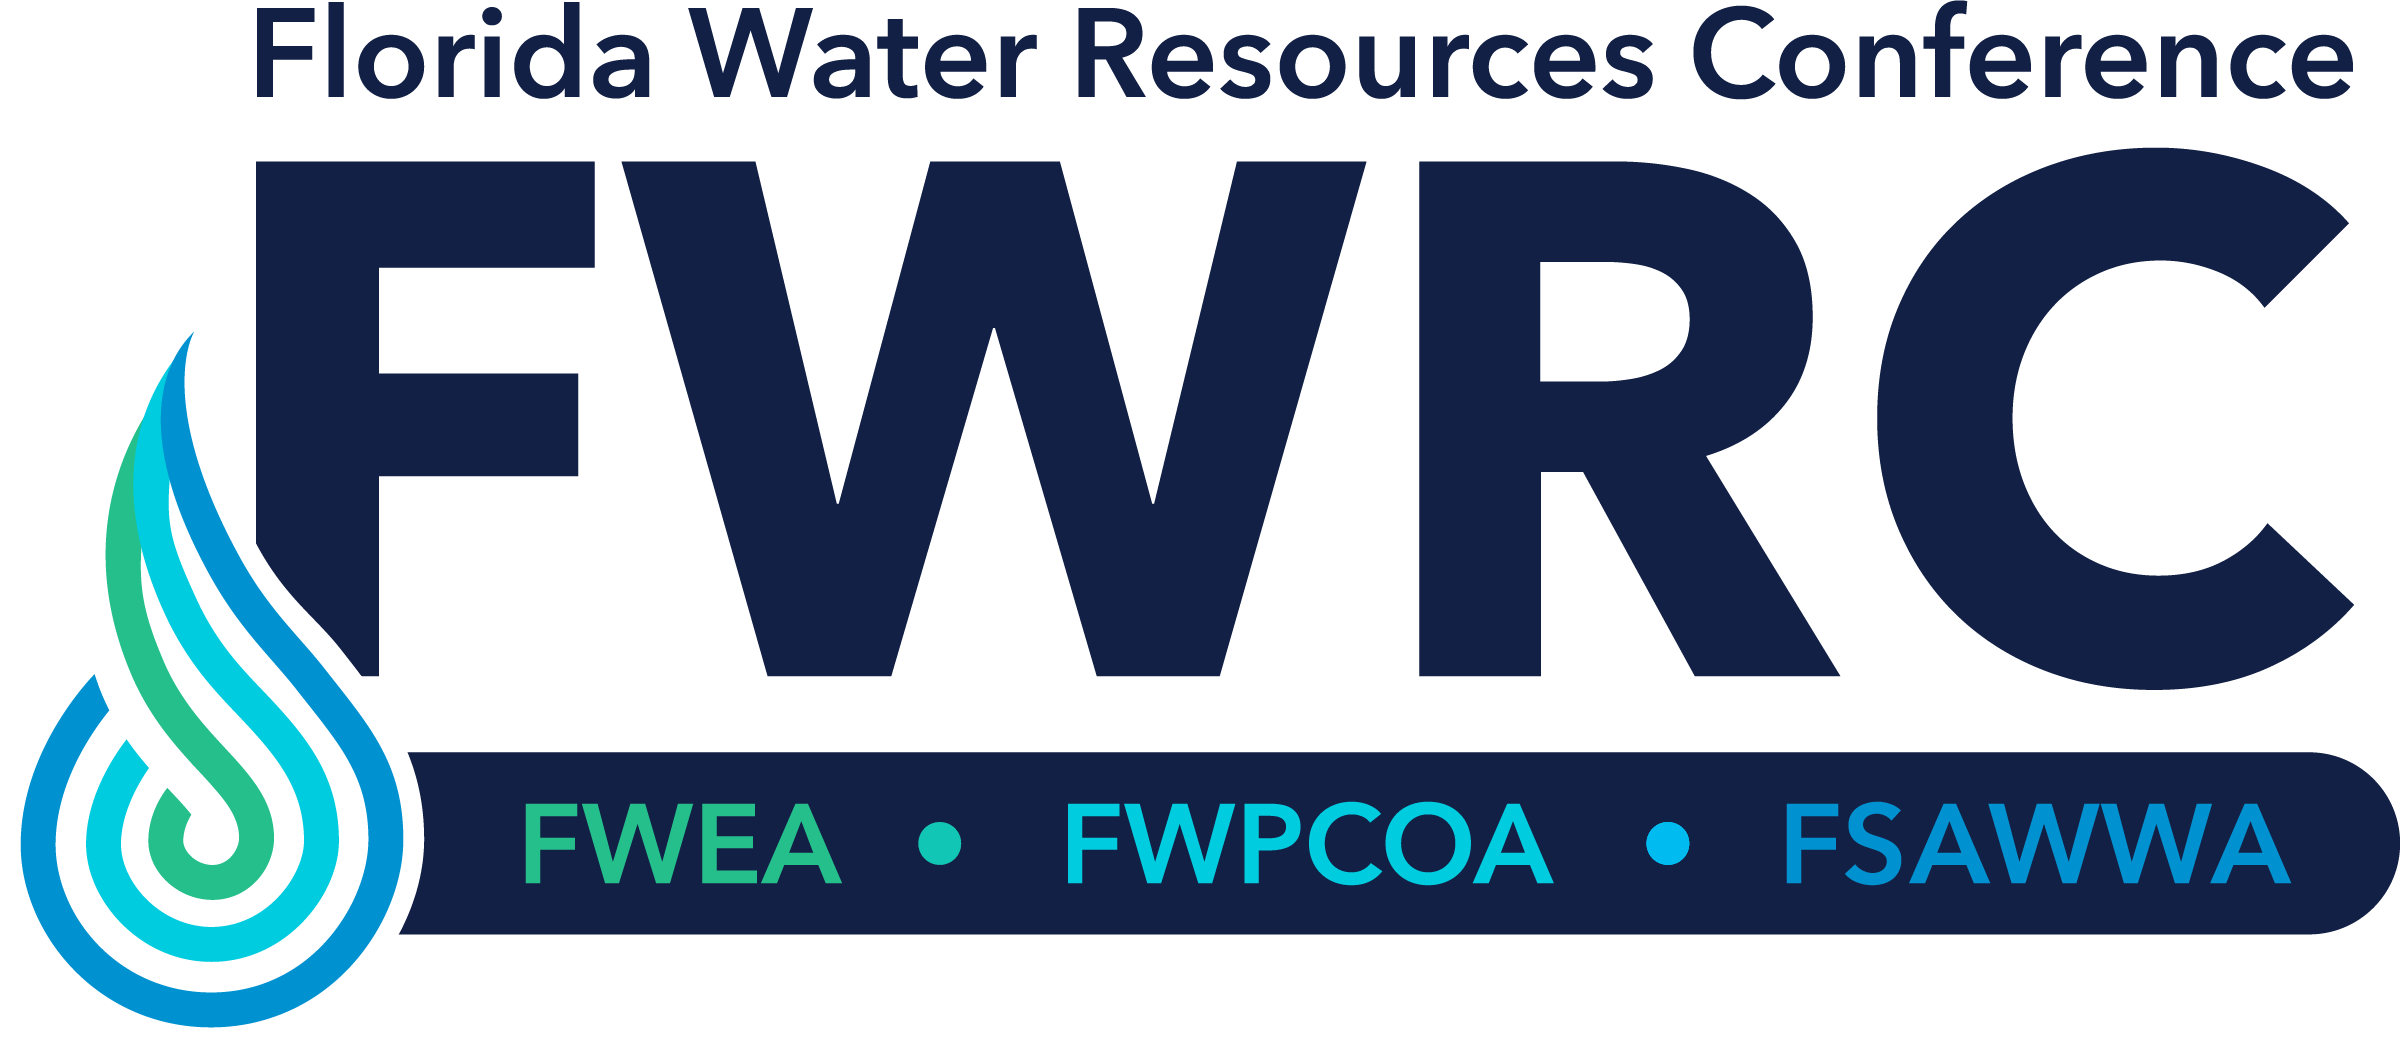 Florida Water Resources Conference FWRC